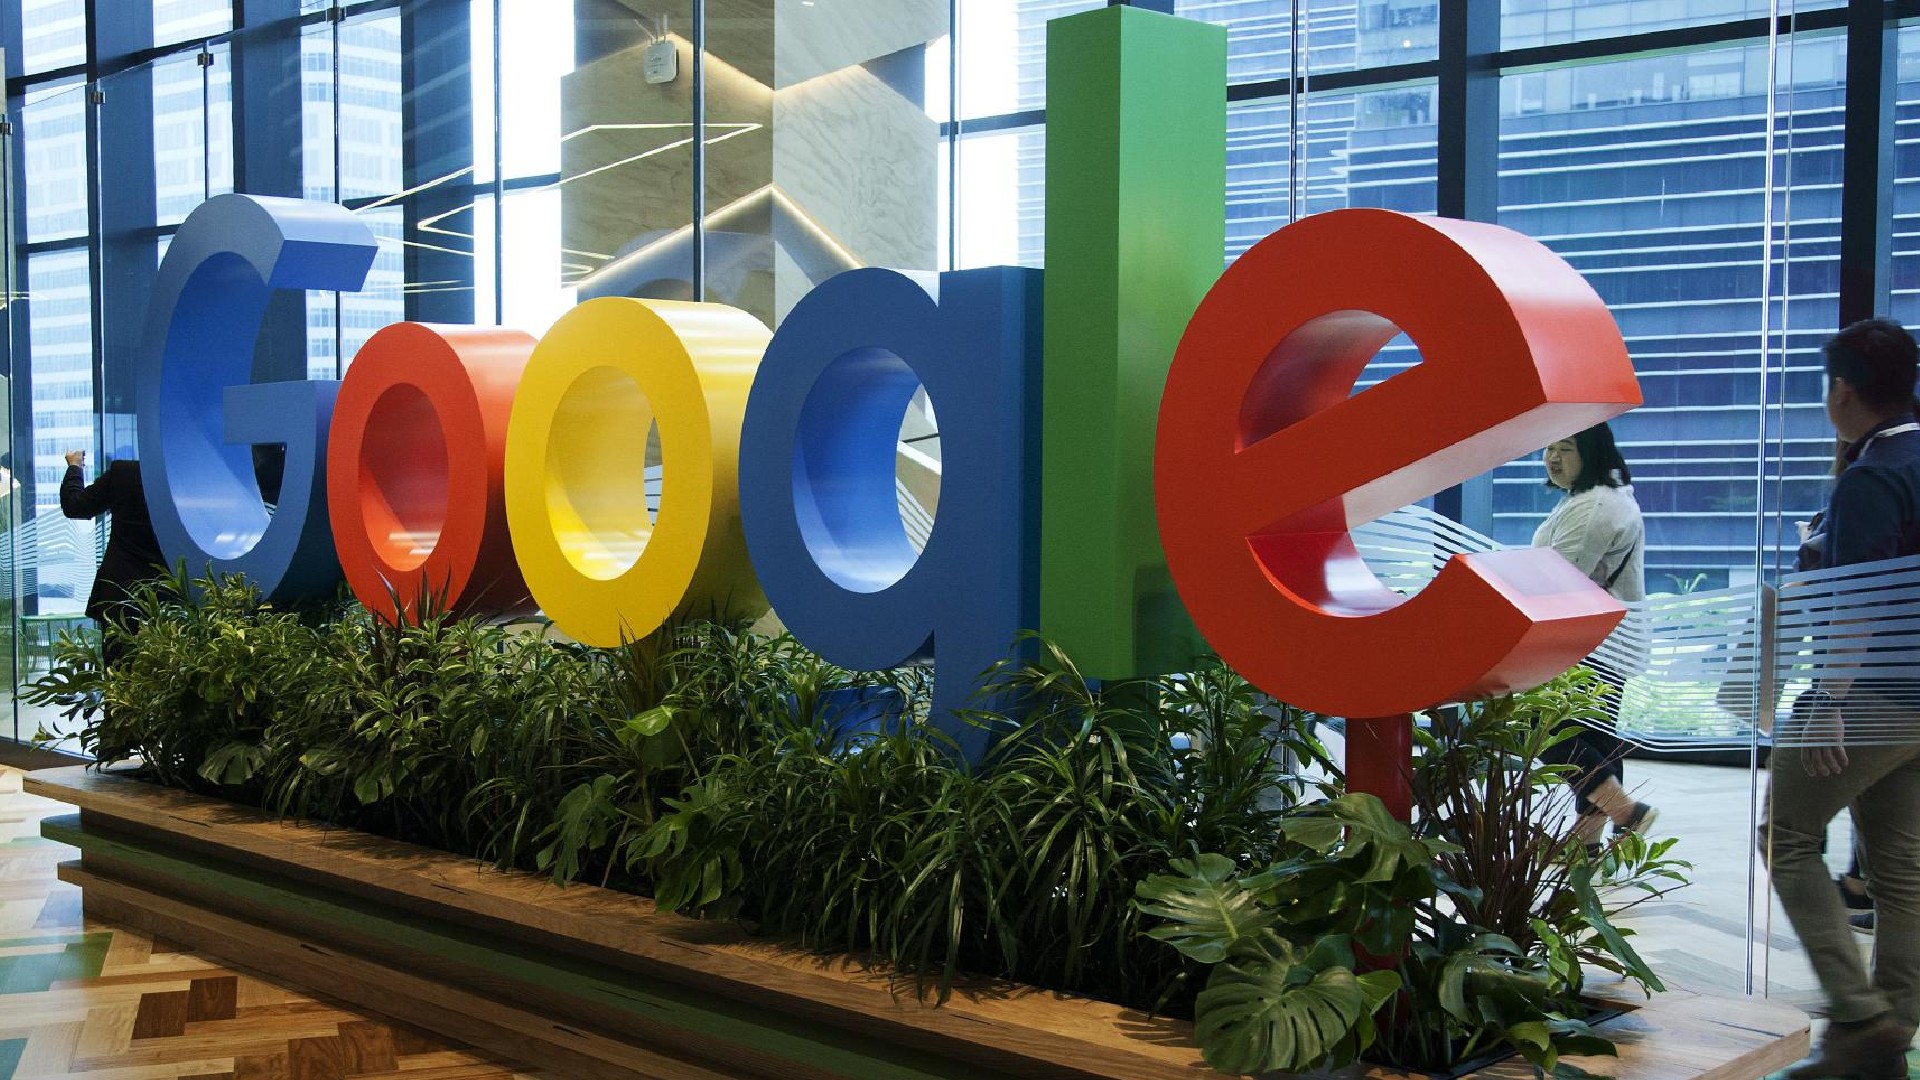 Google India To Enable 10k Startups In Tier 2 And Tier 3 Cities In India.